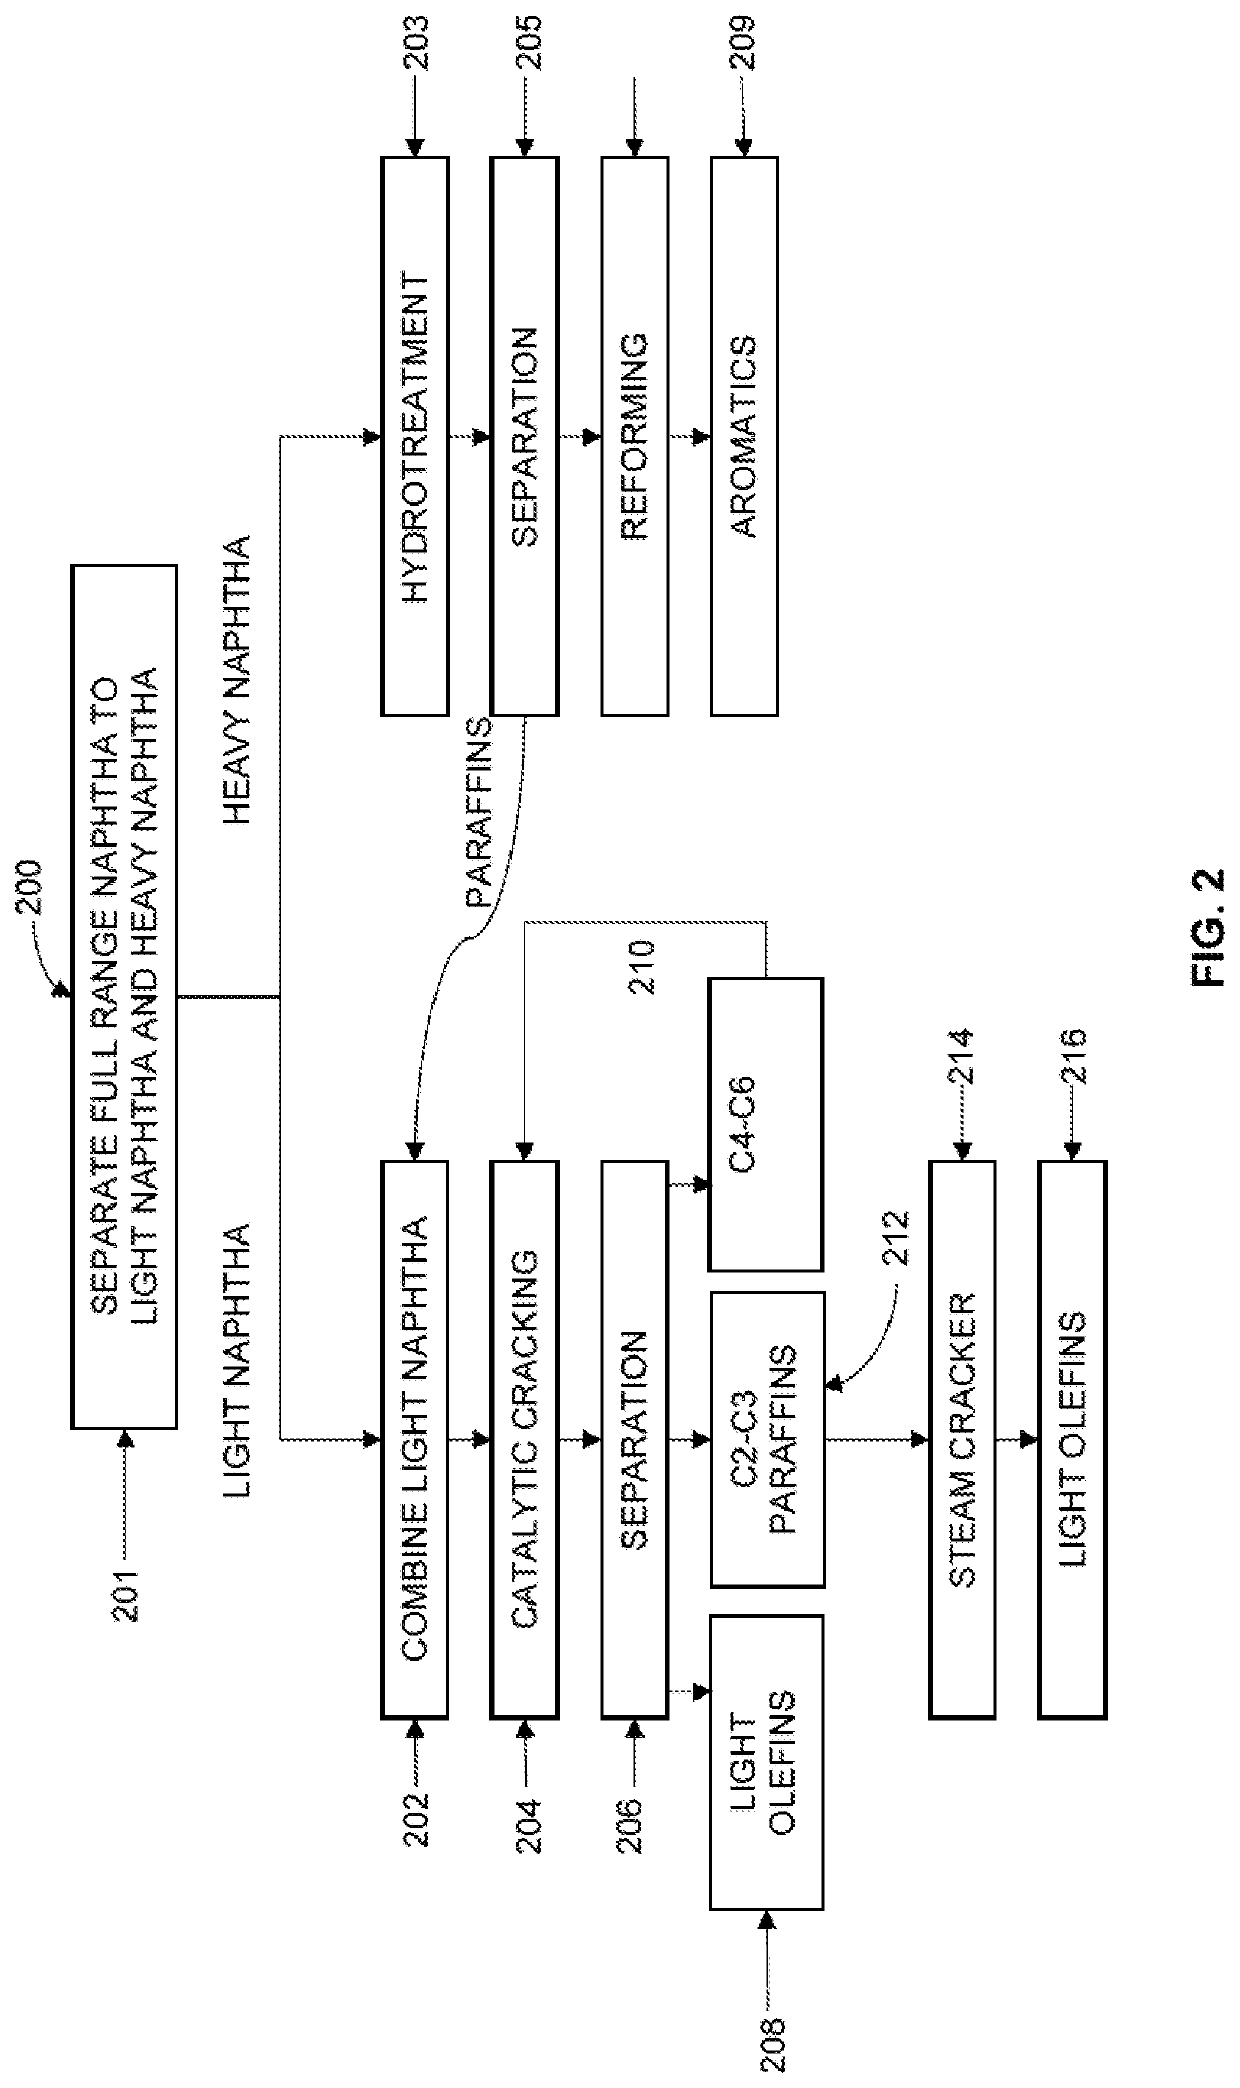 Process of producing light olefins and aromatics from wide range boiling point naphtha